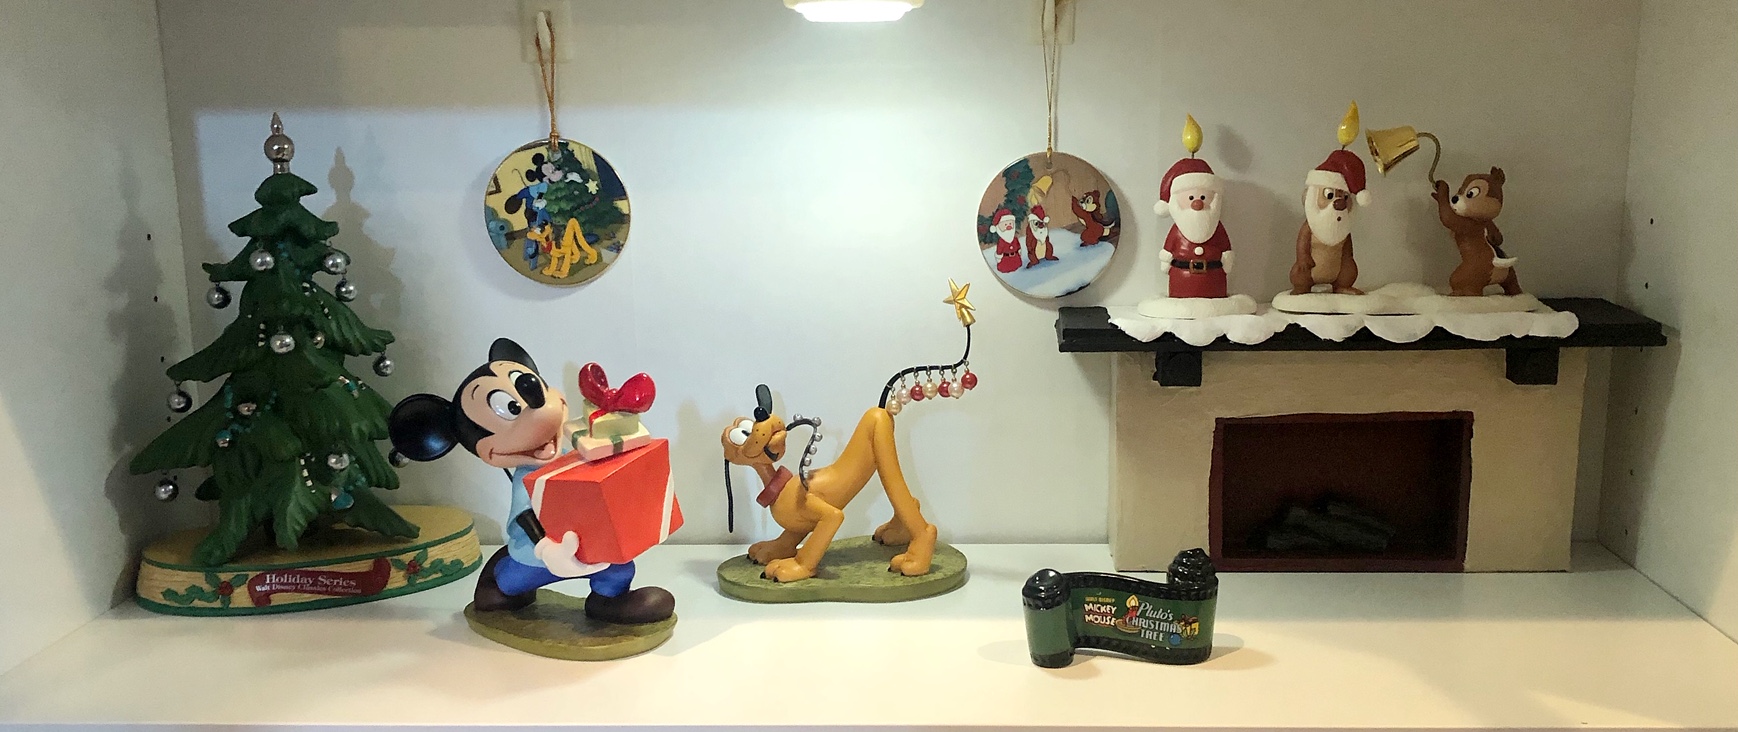 Pluto's Christmas Tree - Fireplace Caboodle Extras - WDCC